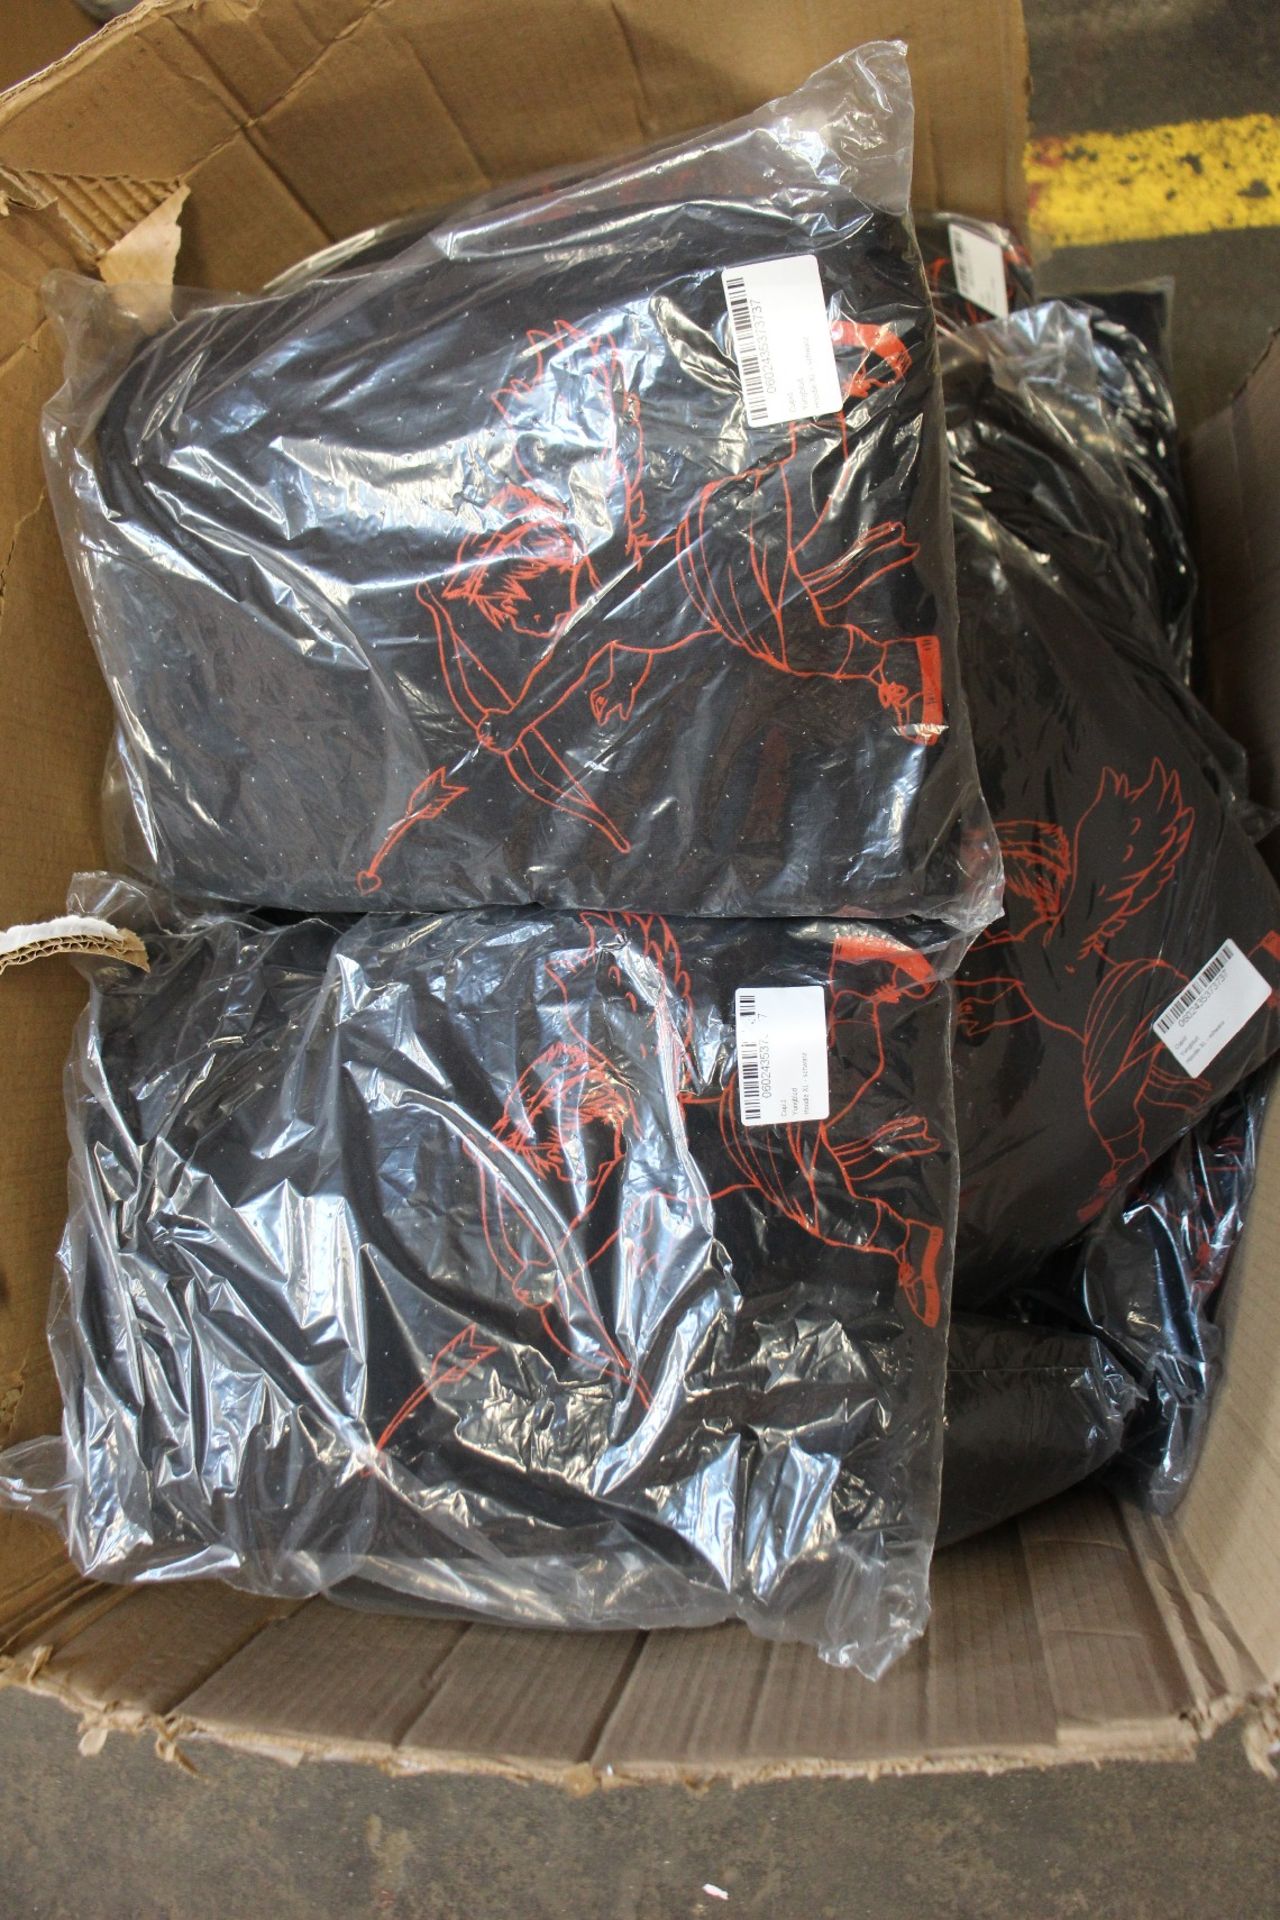 A quantity of as new Yungblud Cupid hoodies in black (All XL - 24 items).